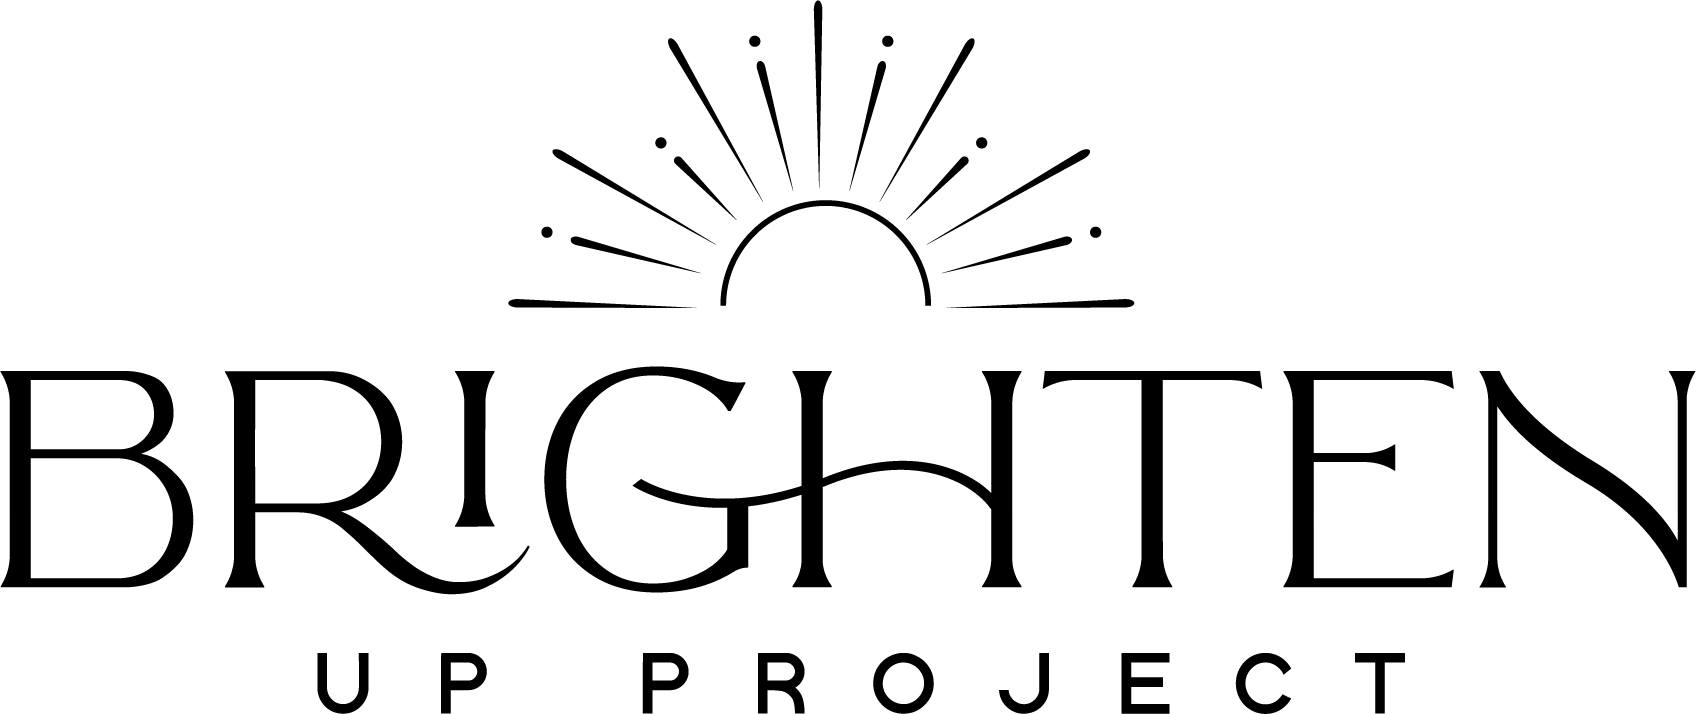 Brighten Up Project